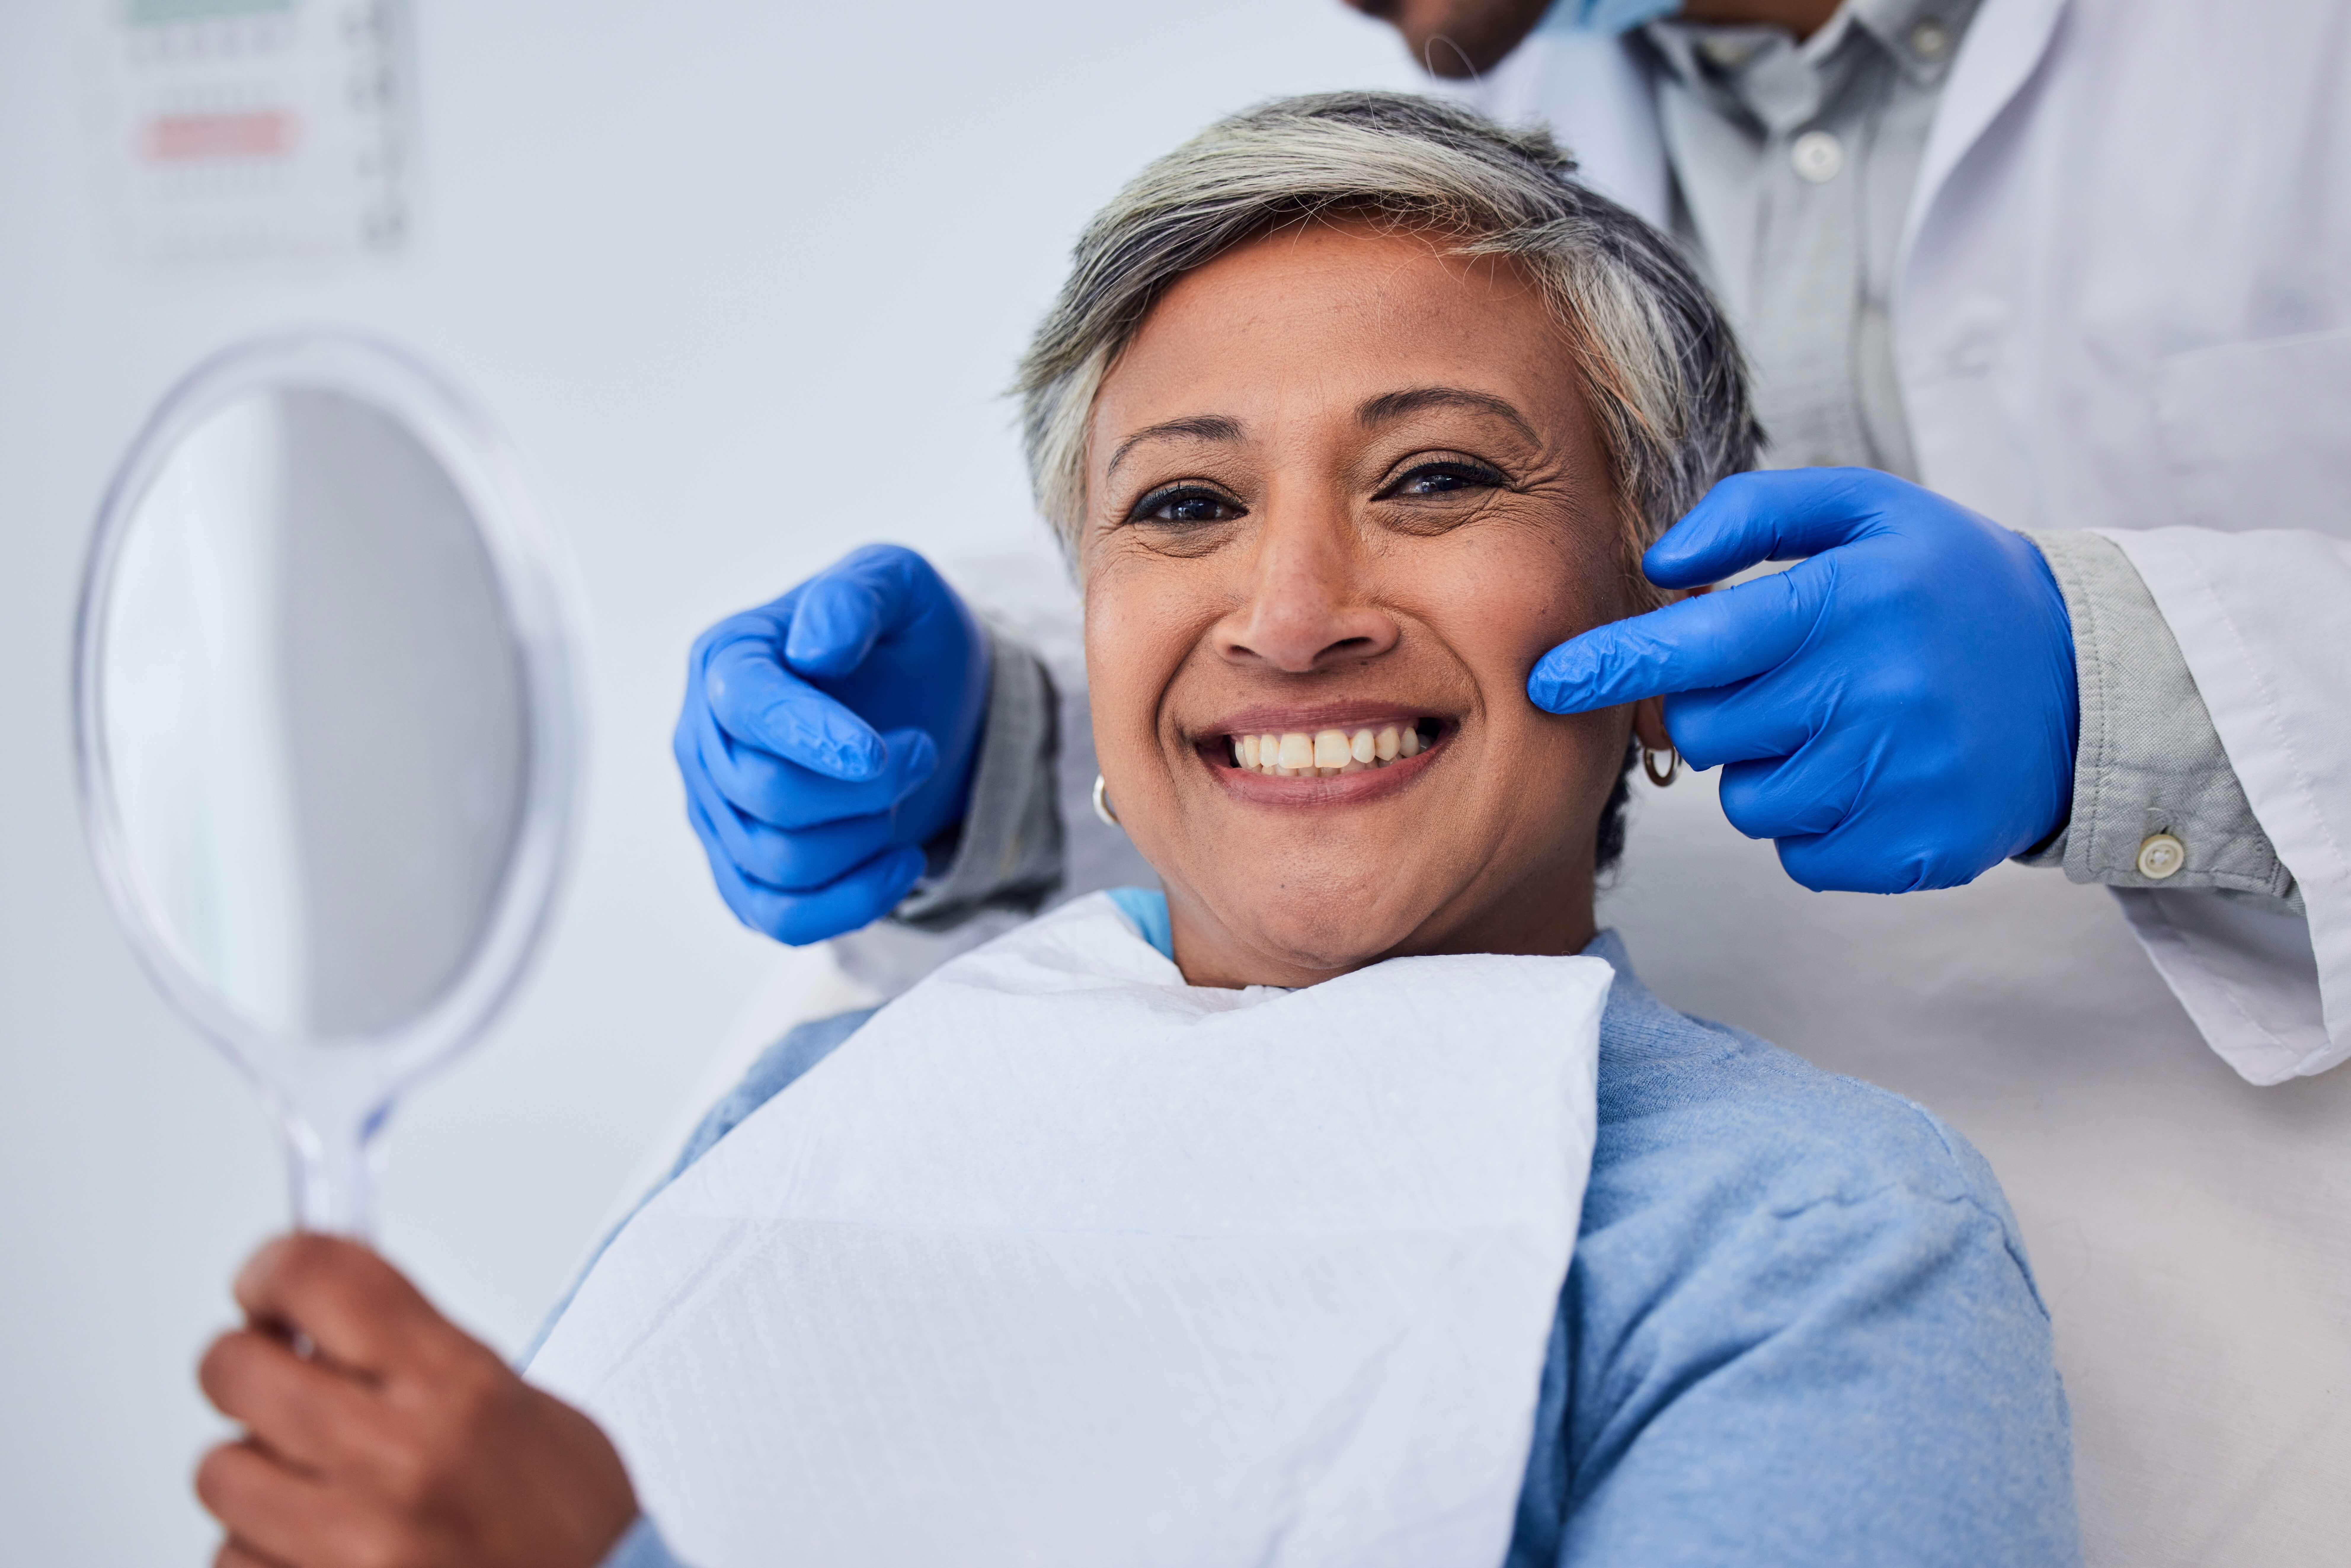 Common Misconceptions About Dental Cleanings